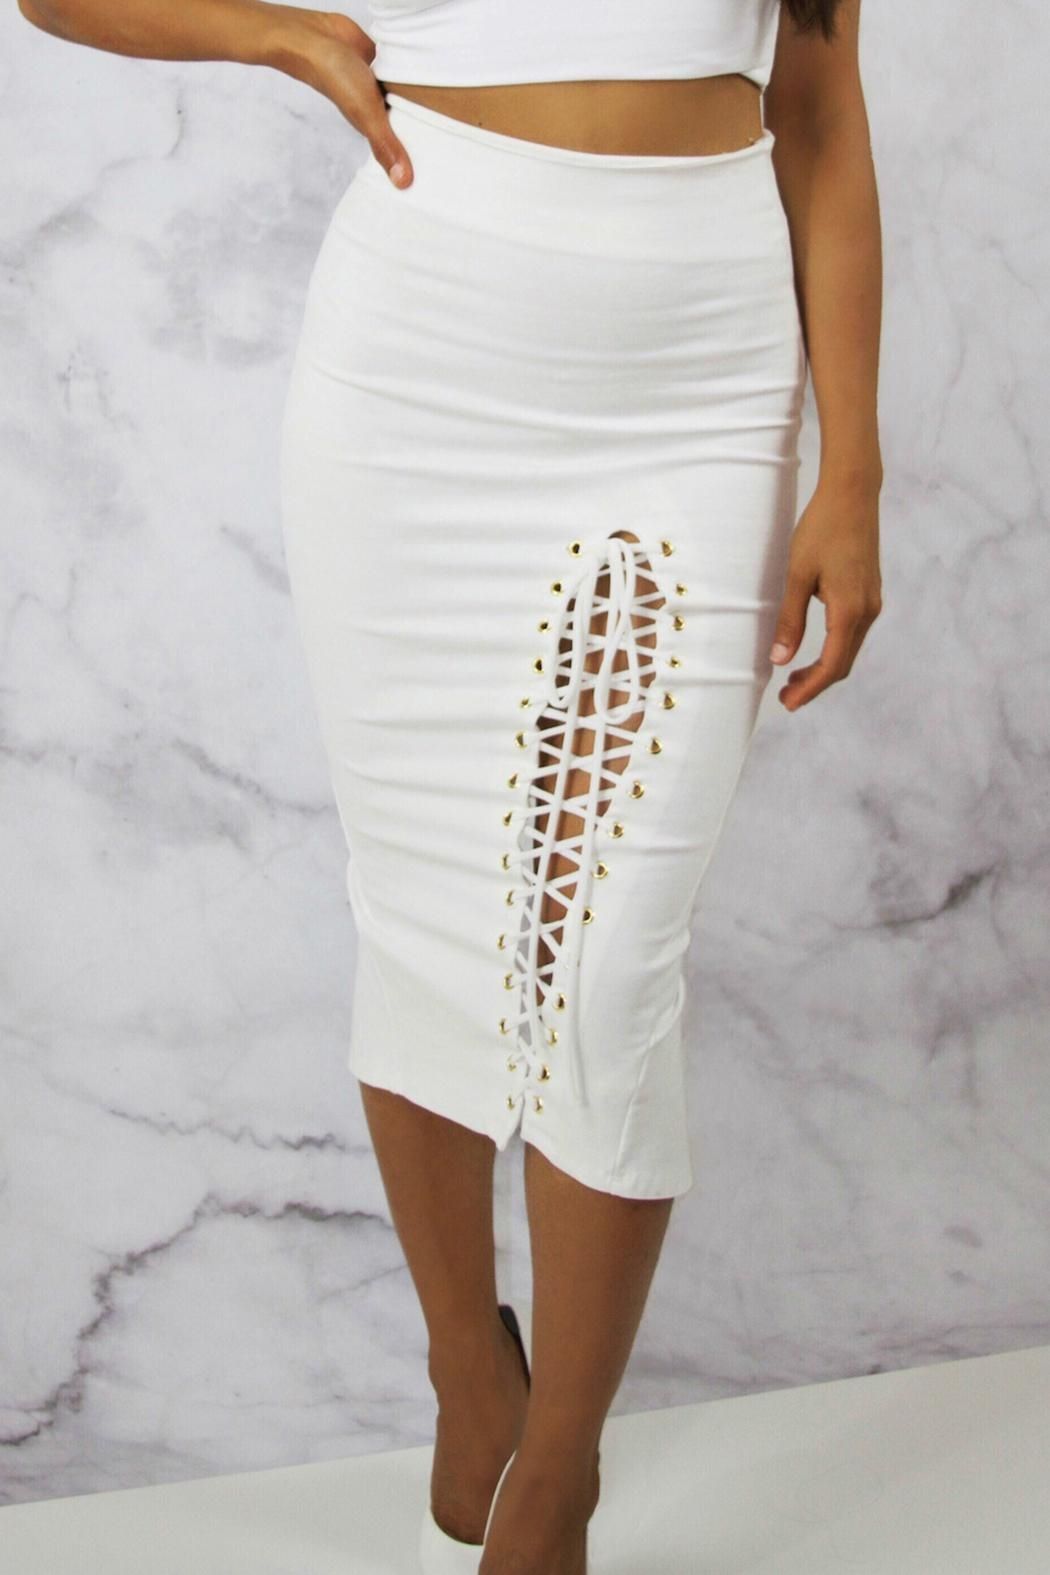 White Lace Pencil Skirt Outfit